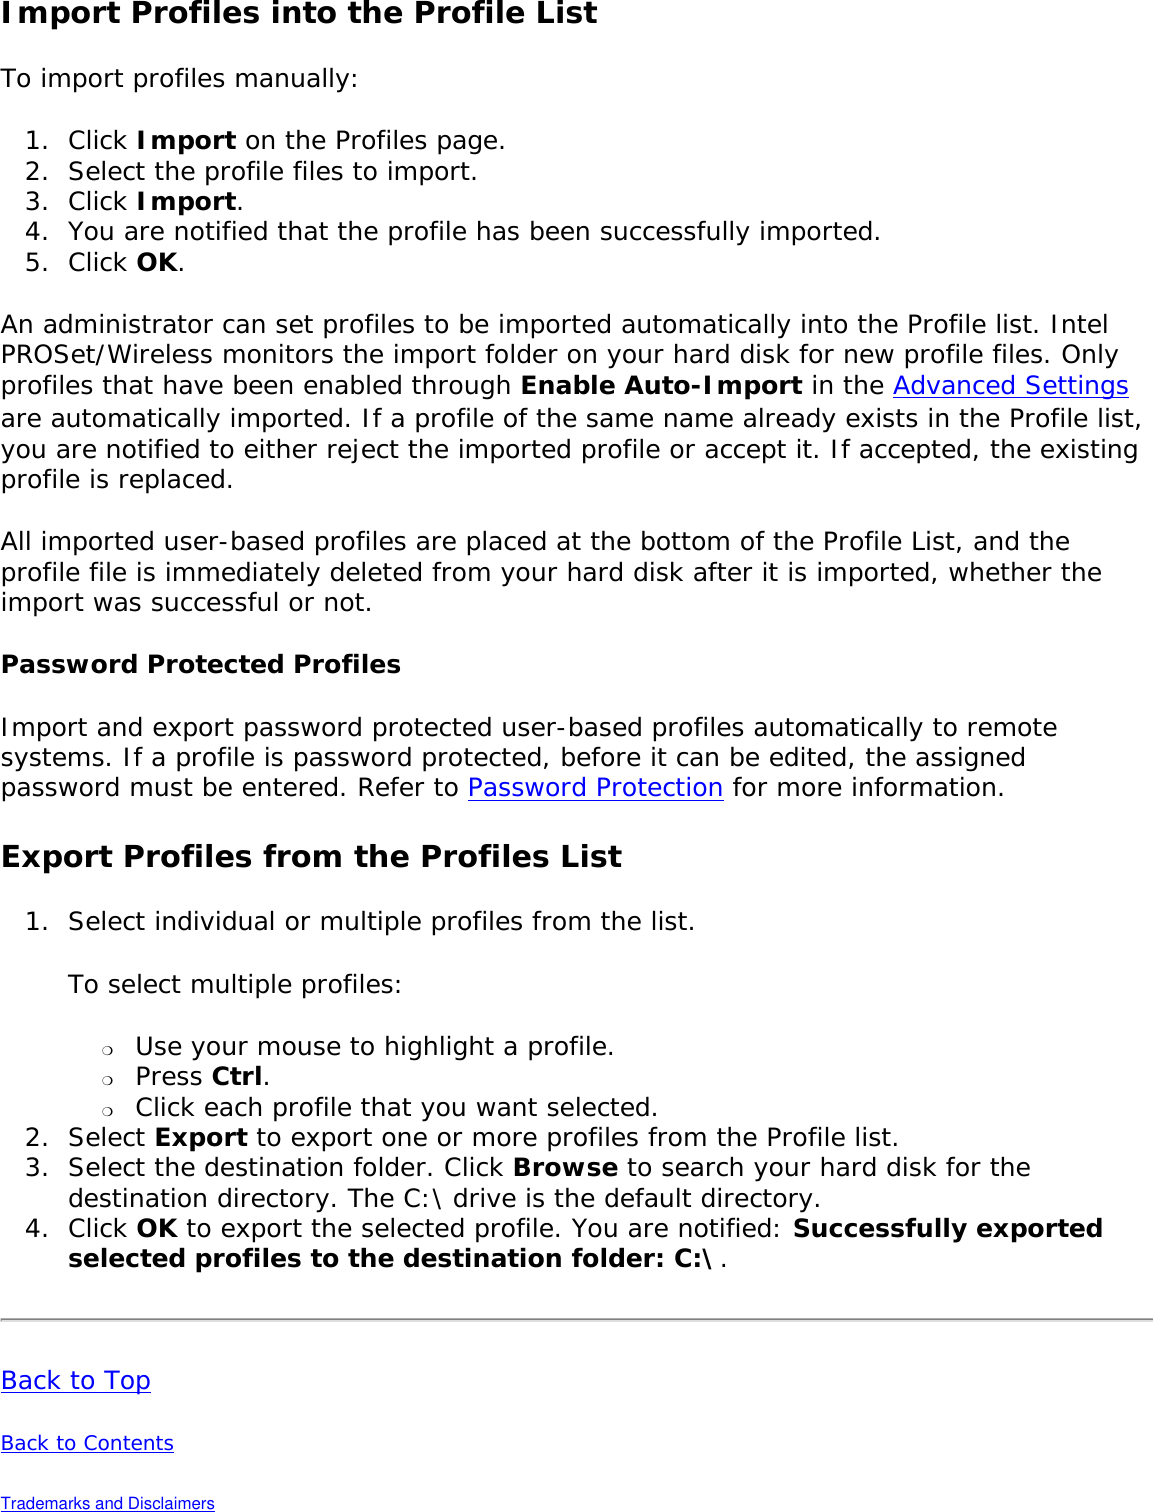 Import Profiles into the Profile ListTo import profiles manually: 1.  Click Import on the Profiles page.2.  Select the profile files to import.3.  Click Import.4.  You are notified that the profile has been successfully imported.5.  Click OK. An administrator can set profiles to be imported automatically into the Profile list. Intel PROSet/Wireless monitors the import folder on your hard disk for new profile files. Only profiles that have been enabled through Enable Auto-Import in the Advanced Settings are automatically imported. If a profile of the same name already exists in the Profile list, you are notified to either reject the imported profile or accept it. If accepted, the existing profile is replaced. All imported user-based profiles are placed at the bottom of the Profile List, and the profile file is immediately deleted from your hard disk after it is imported, whether the import was successful or not. Password Protected ProfilesImport and export password protected user-based profiles automatically to remote systems. If a profile is password protected, before it can be edited, the assigned password must be entered. Refer to Password Protection for more information. Export Profiles from the Profiles List1.  Select individual or multiple profiles from the list. To select multiple profiles: ❍     Use your mouse to highlight a profile.❍     Press Ctrl.❍     Click each profile that you want selected. 2.  Select Export to export one or more profiles from the Profile list.3.  Select the destination folder. Click Browse to search your hard disk for the destination directory. The C:\ drive is the default directory. 4.  Click OK to export the selected profile. You are notified: Successfully exported selected profiles to the destination folder: C:\.Back to TopBack to Contents Trademarks and Disclaimers 